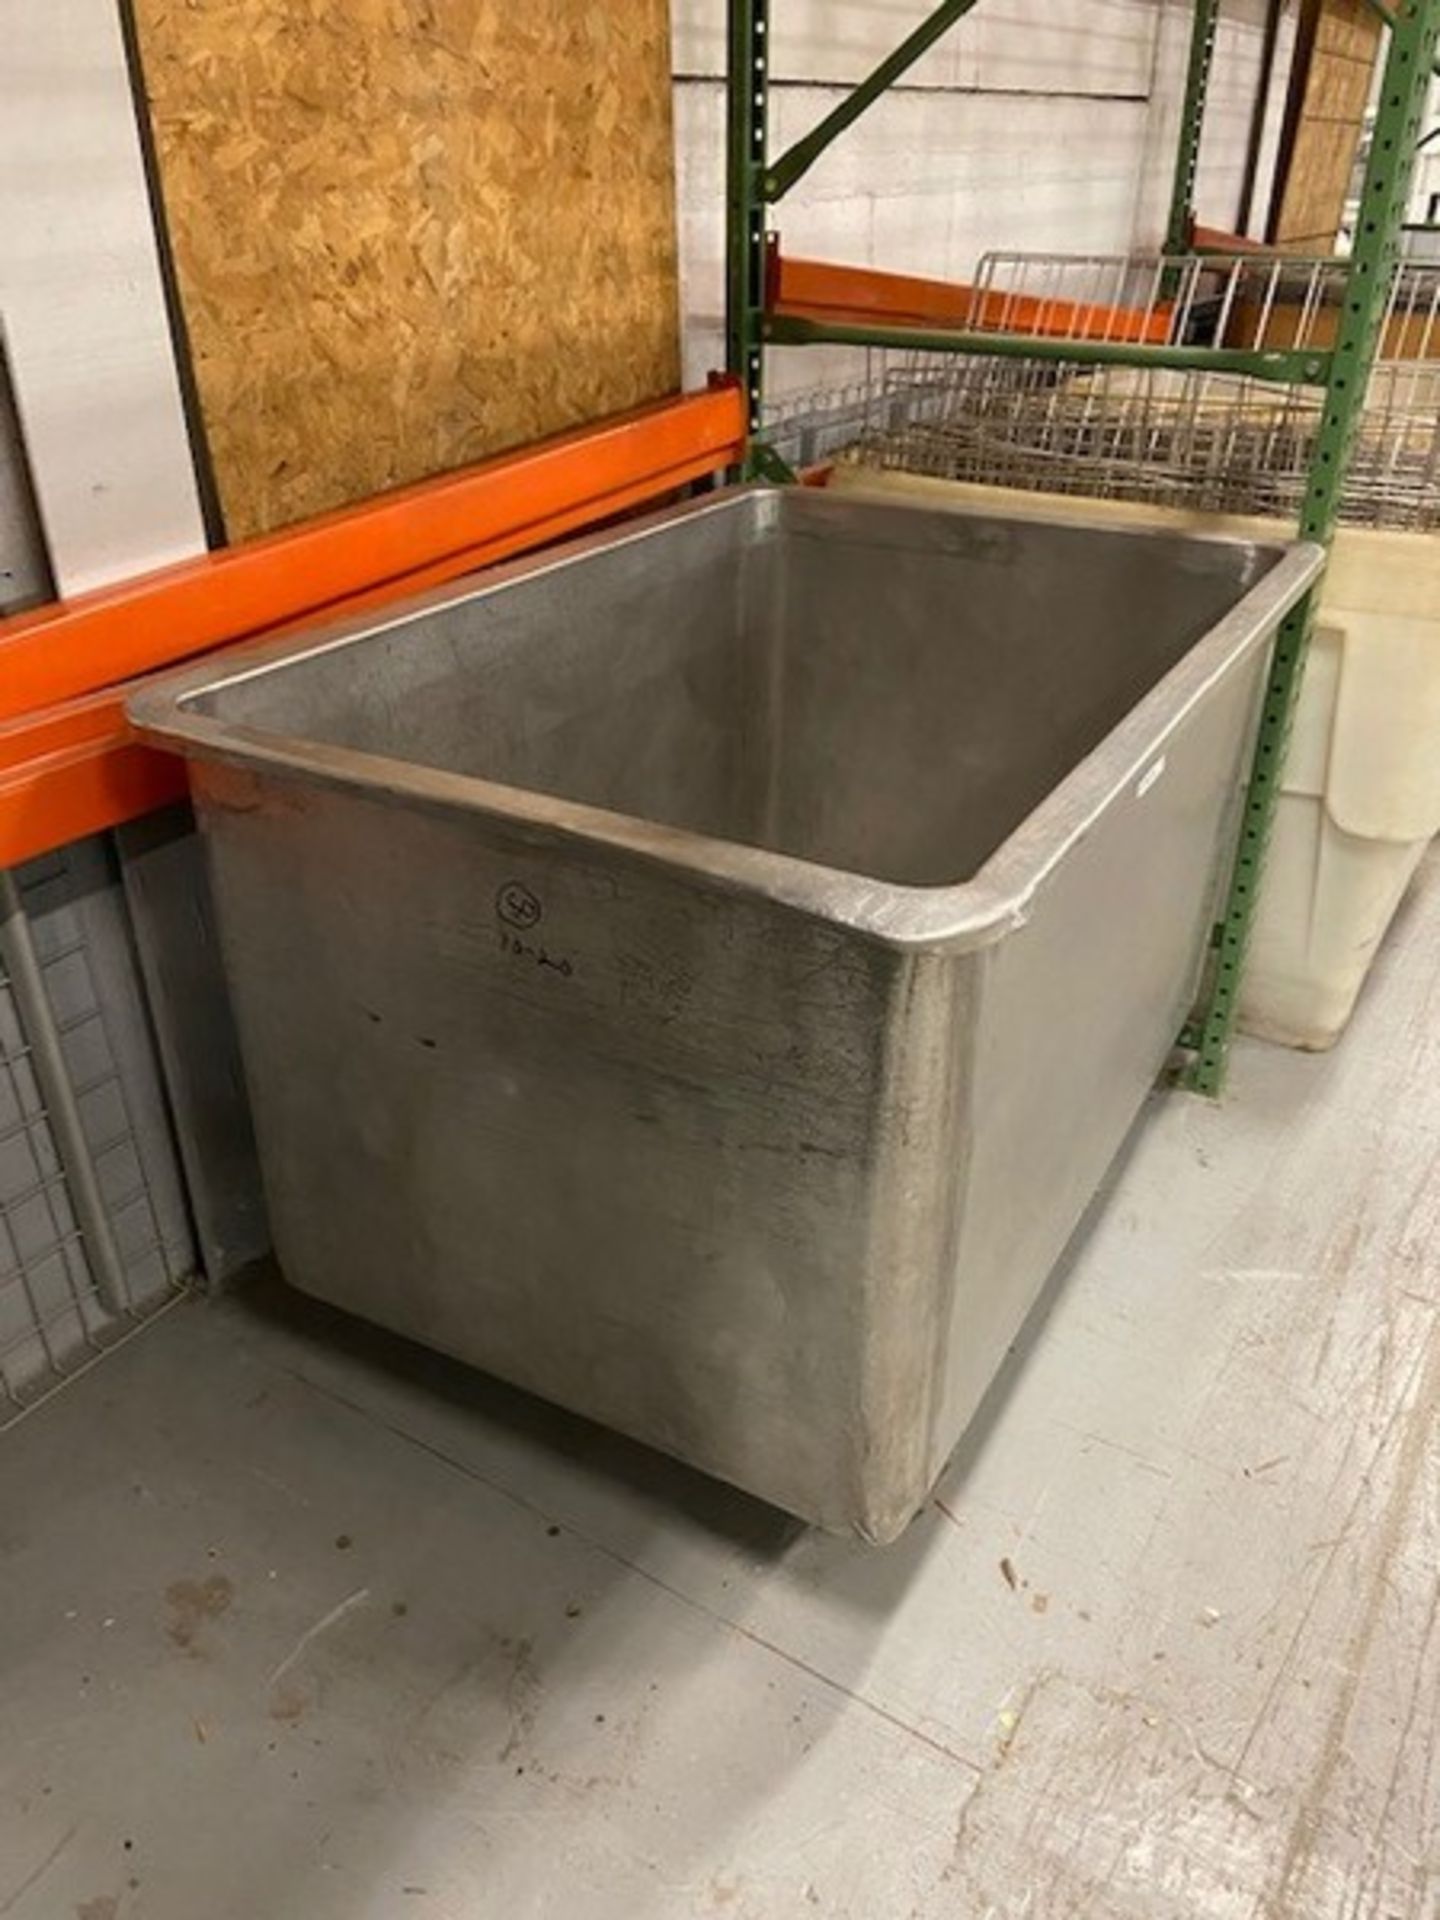 S/S Single Wall Tote, Internal Dims.: Aprox. 53" L x 35-1/2" W x 32" Deep, Mounted on S/S Legs ( - Image 3 of 4